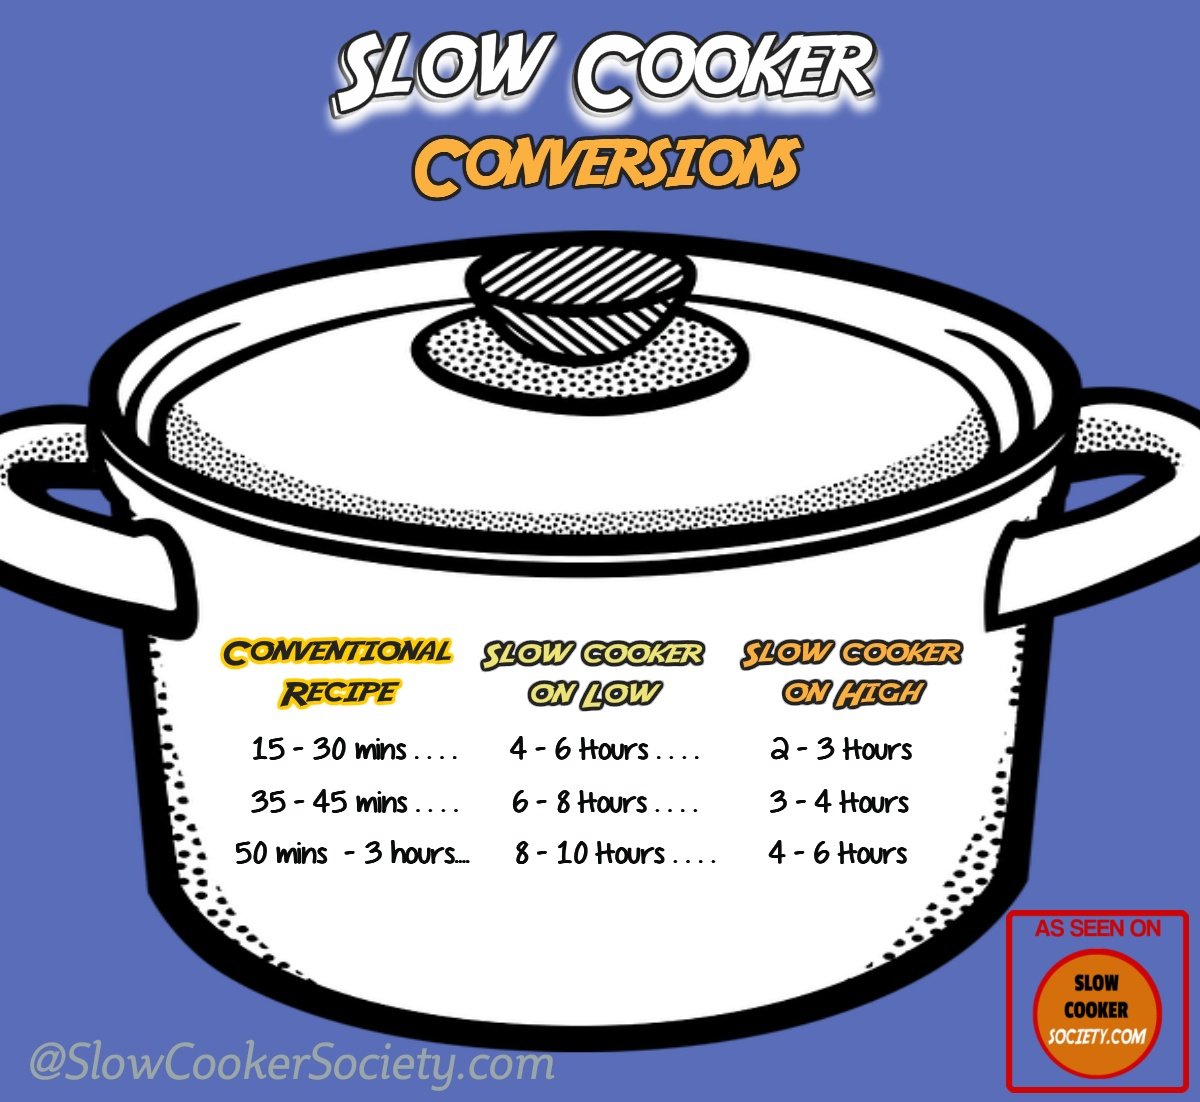 How to Convert (Just About) Any Recipe Into a Slow Cooker One